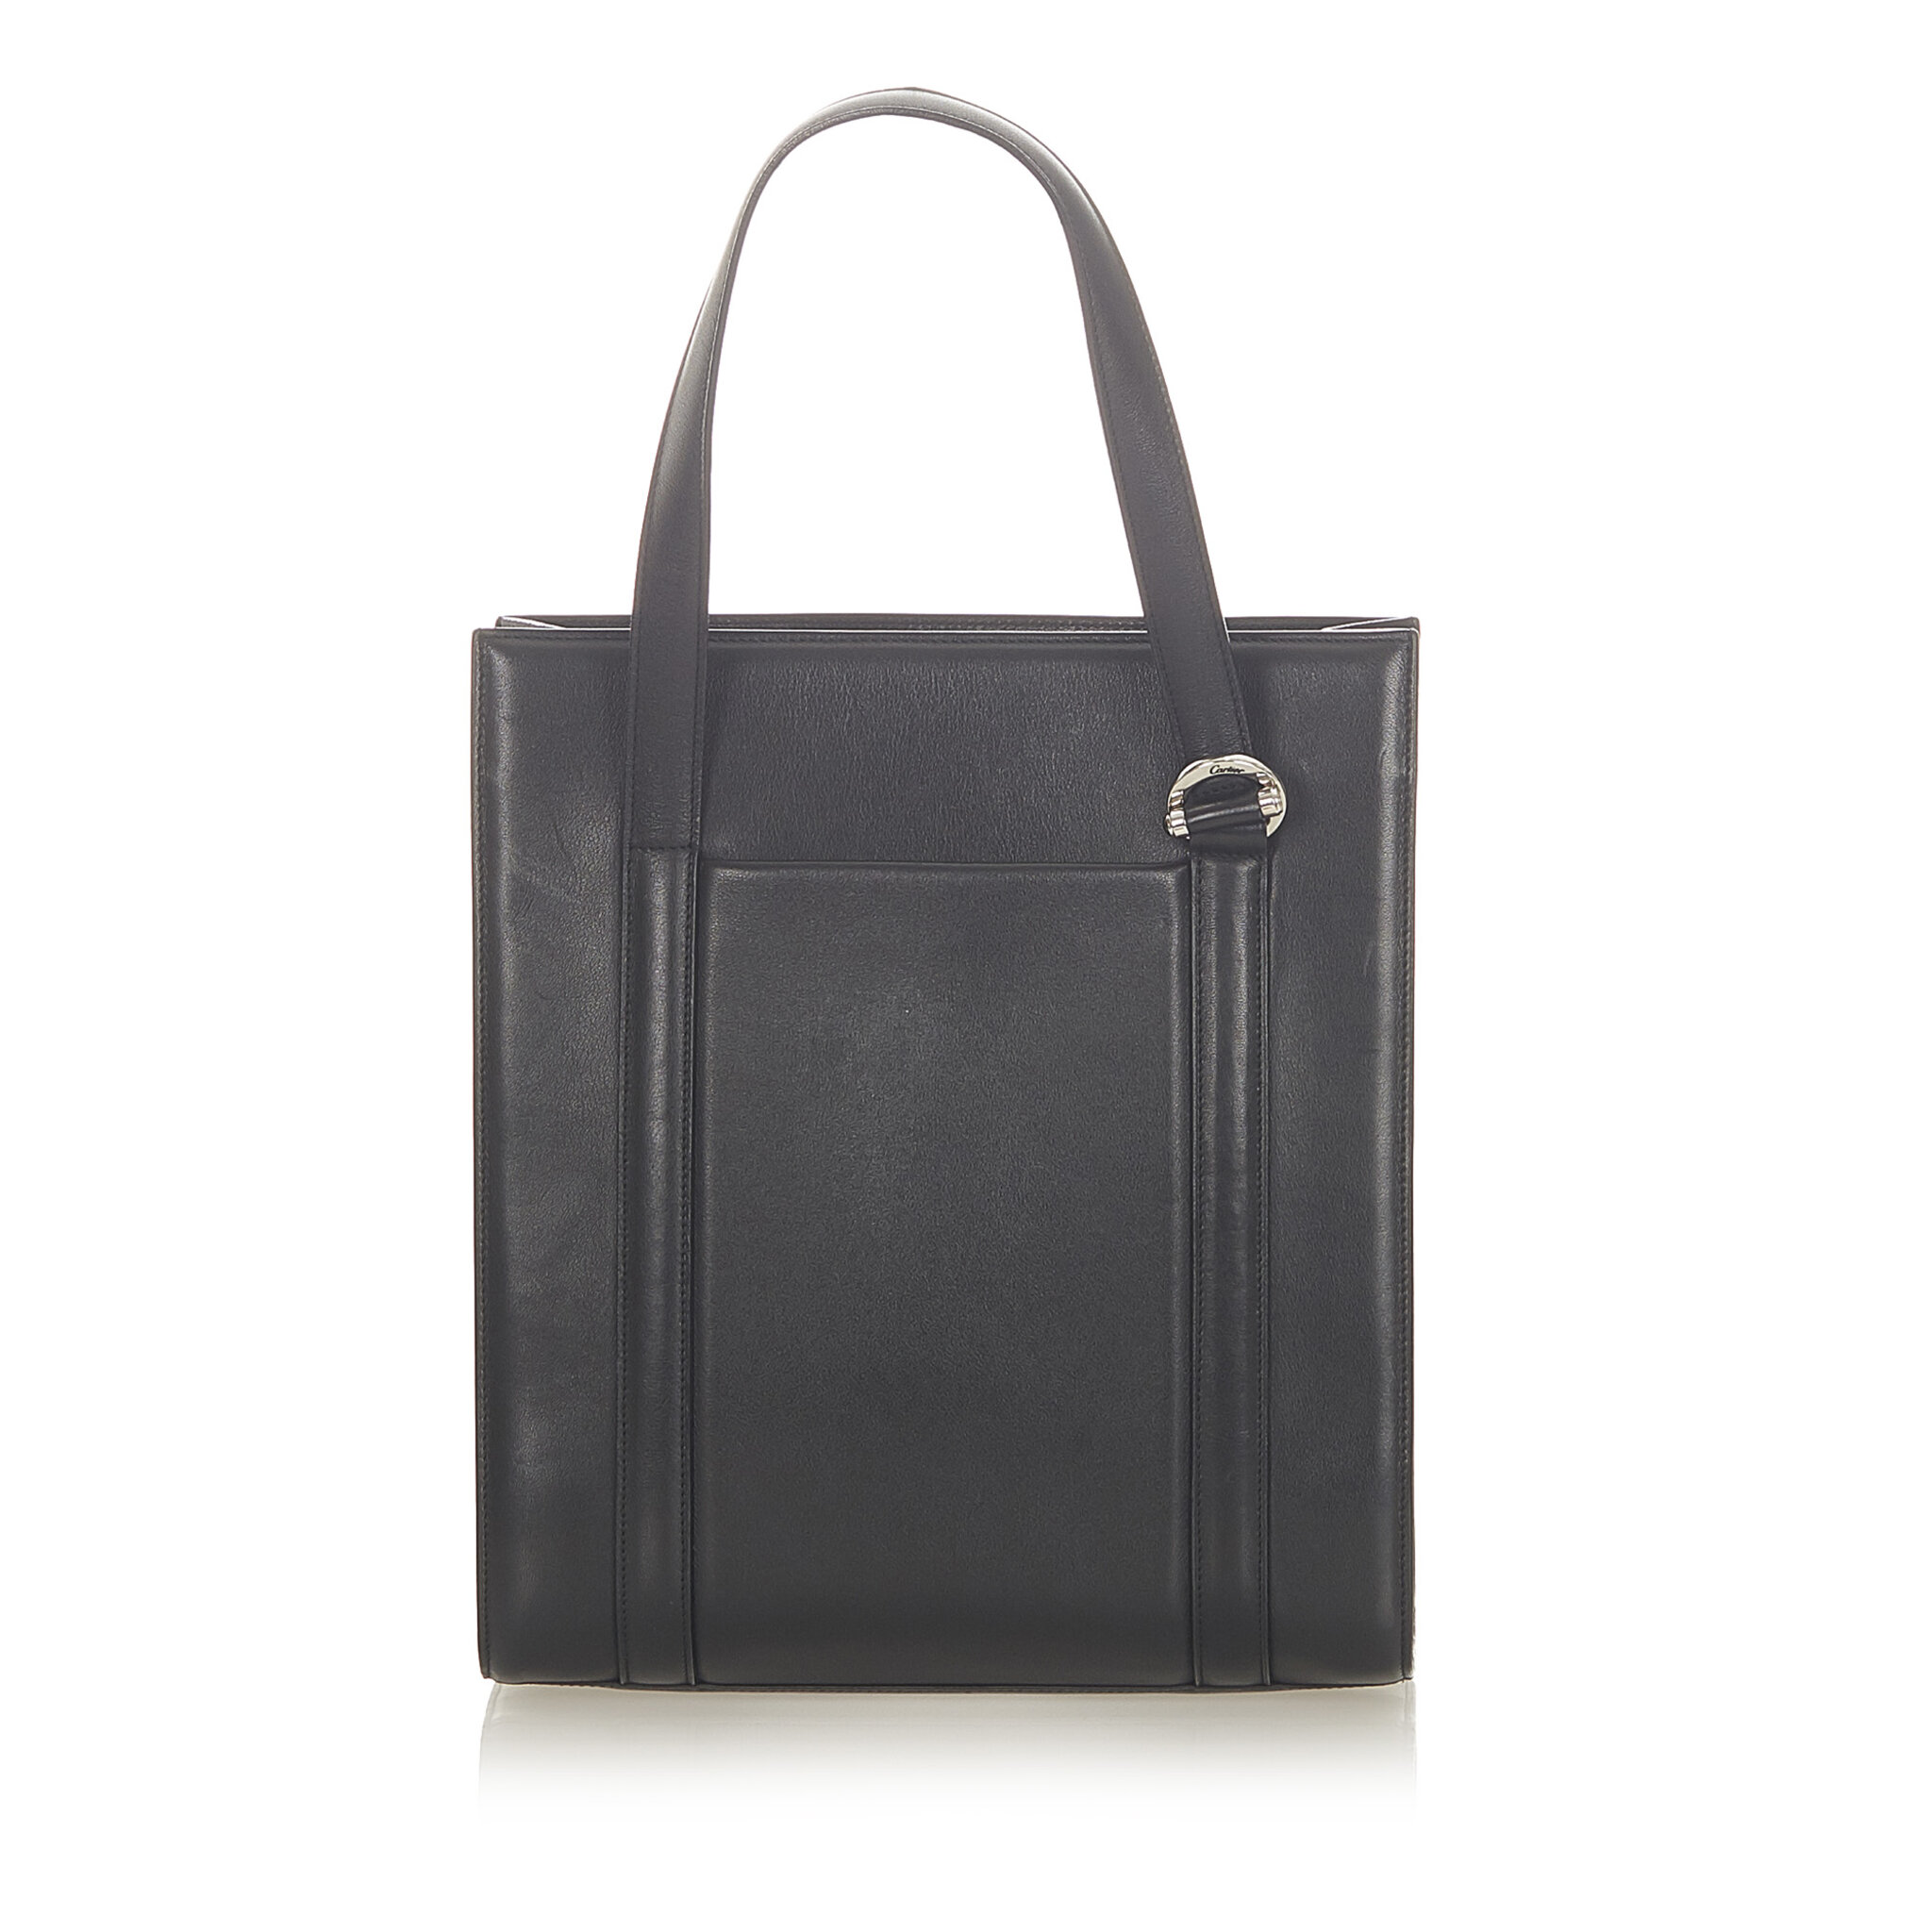 Cartier Leather Tote Bag, black